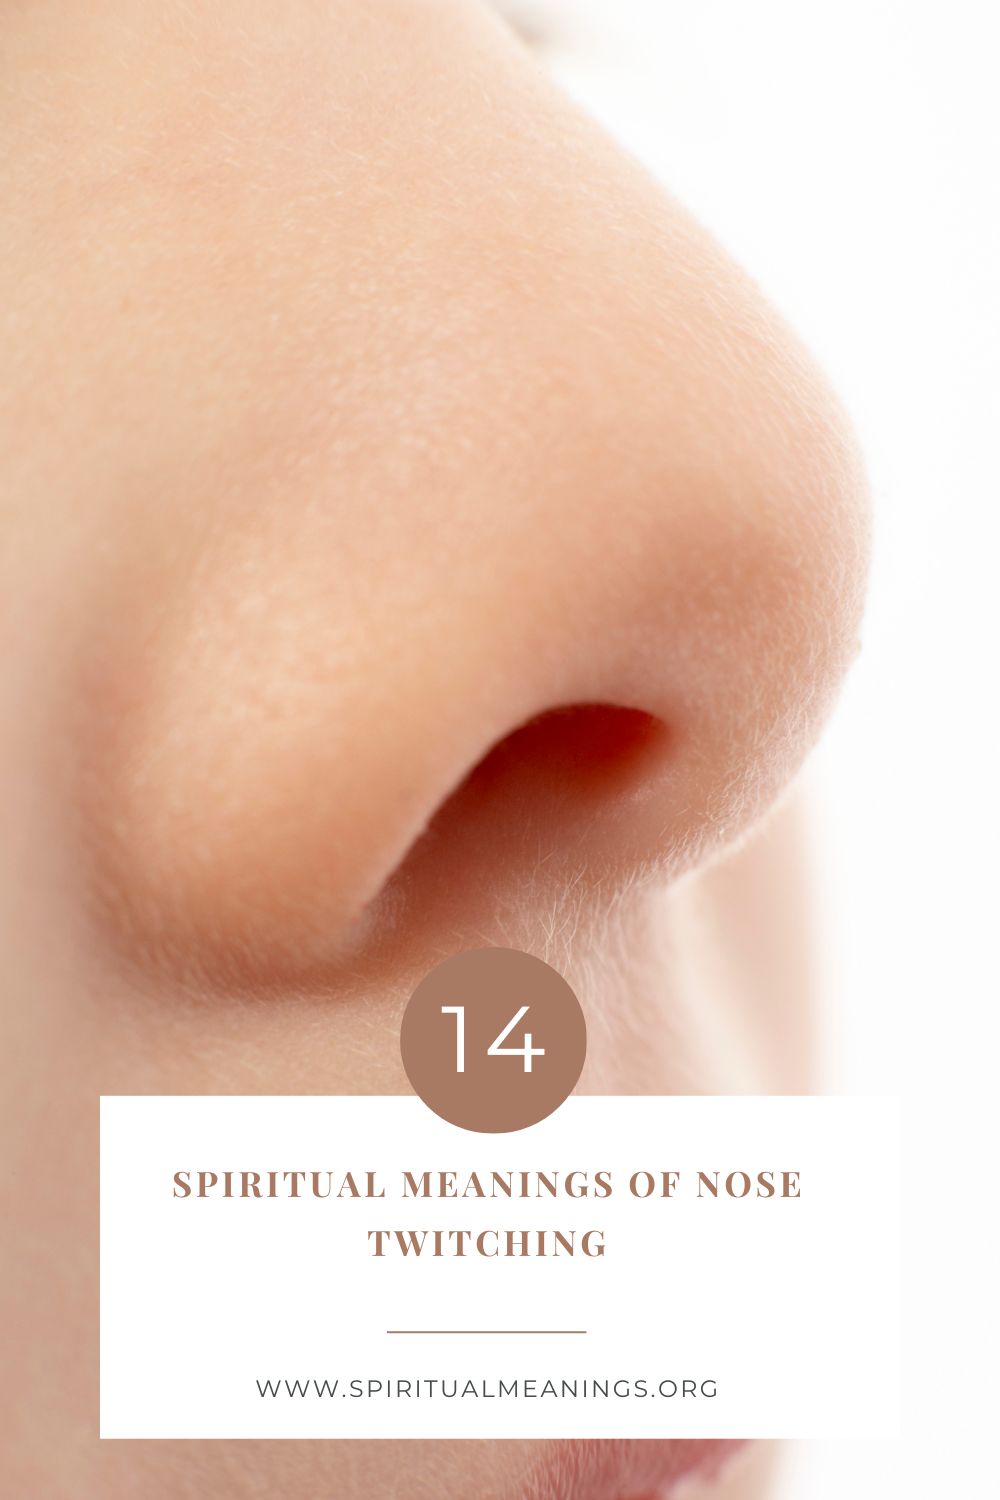 Spiritual Meanings of Nose Twitching